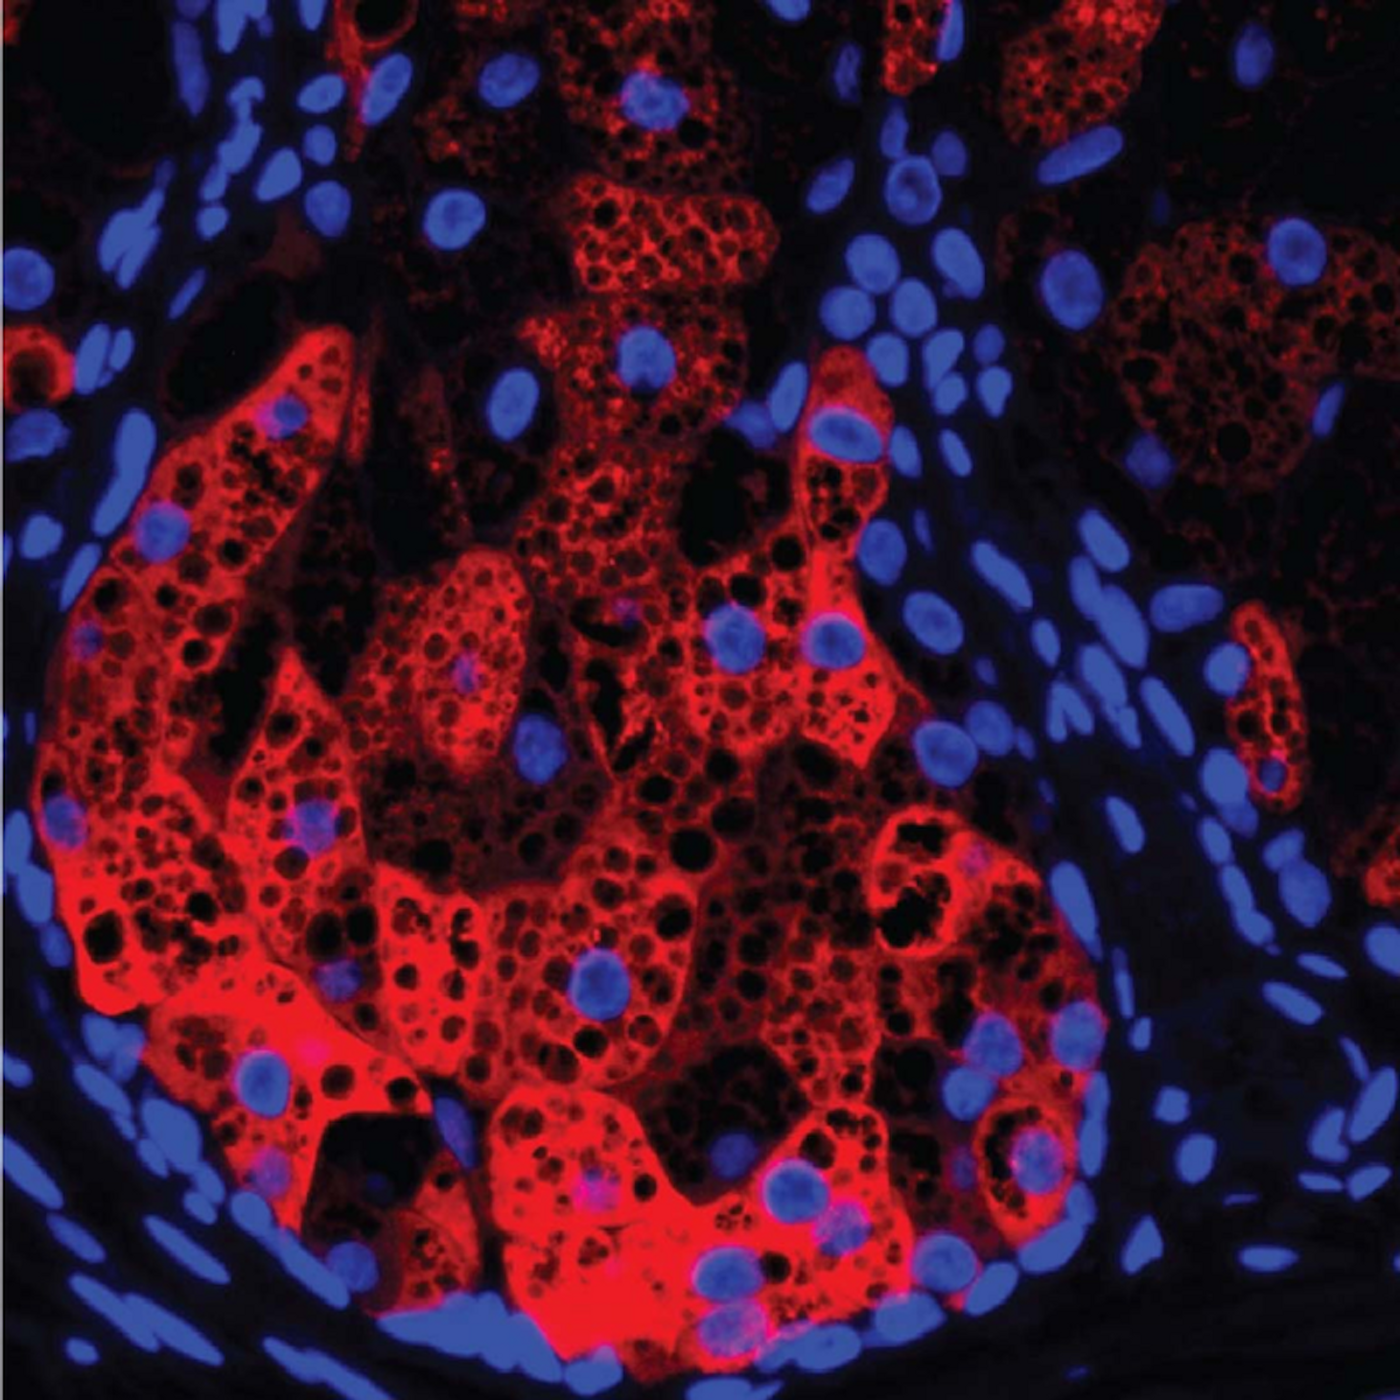 HSD3B1 (red) within a human sebaceous gland, cell nuclei (blue), and lipid droplets (black circular areas). / Credit: UT Southwestern Medical Center